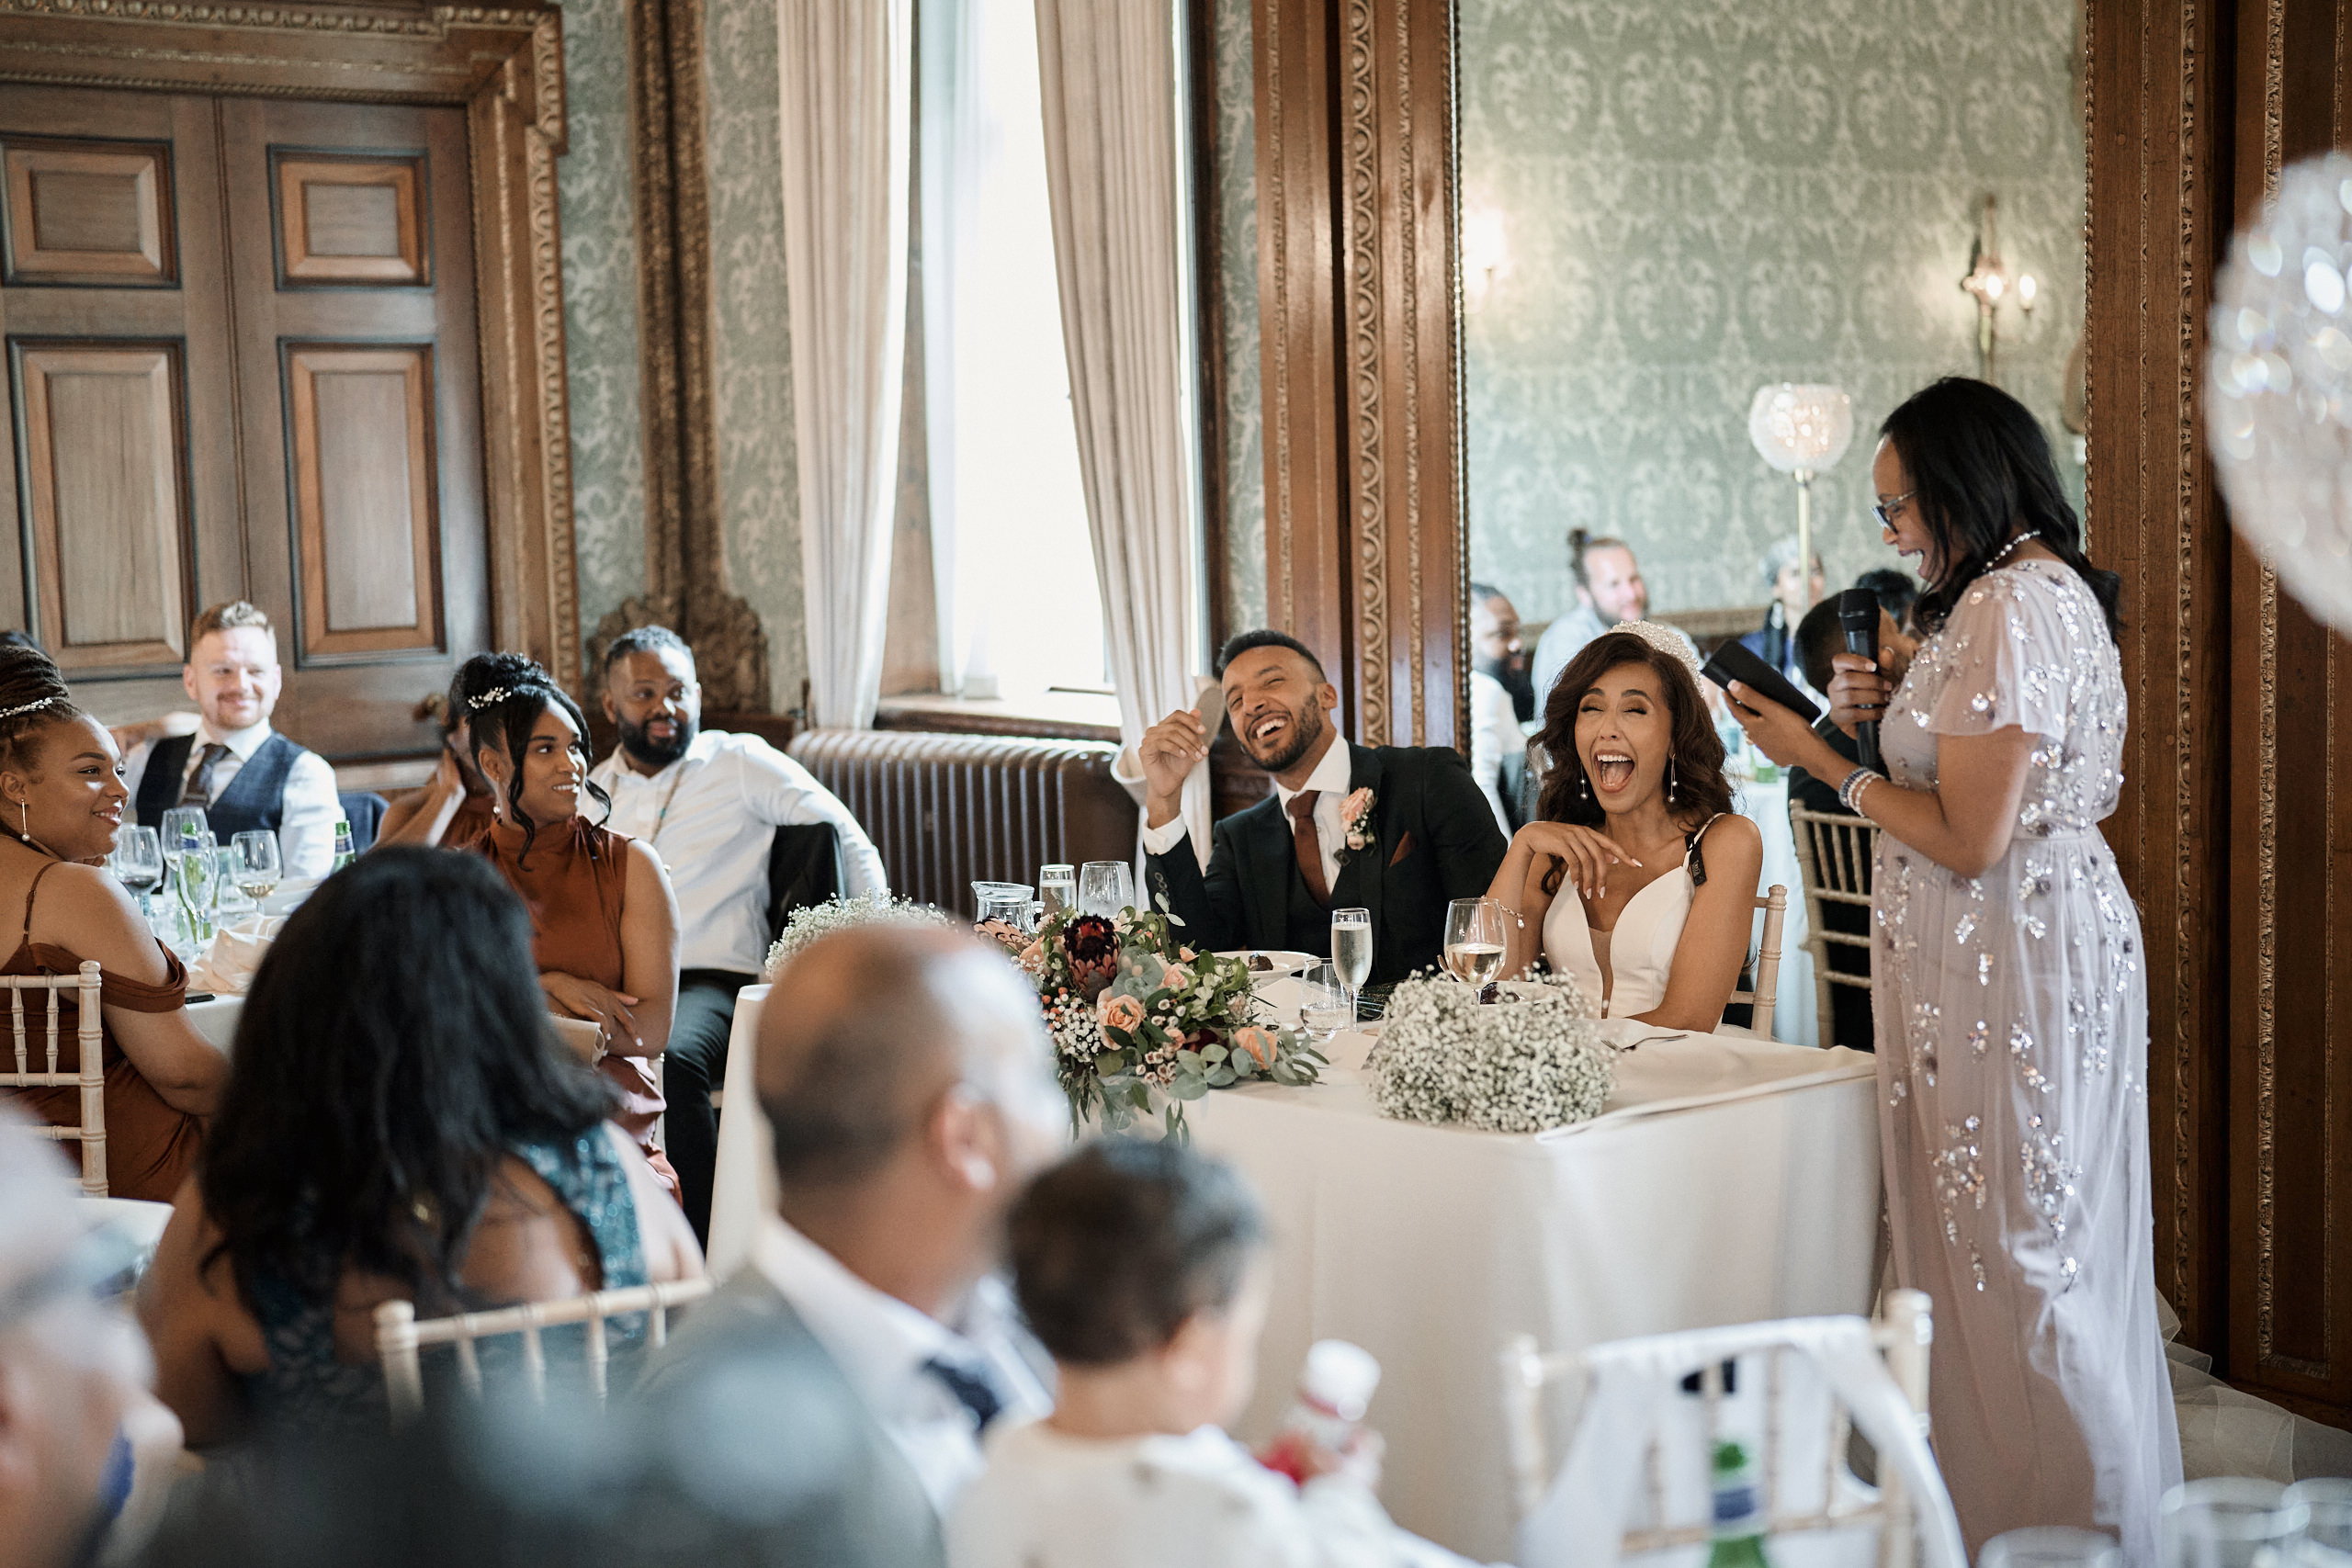 A man and woman giving a speech at a wedding party.